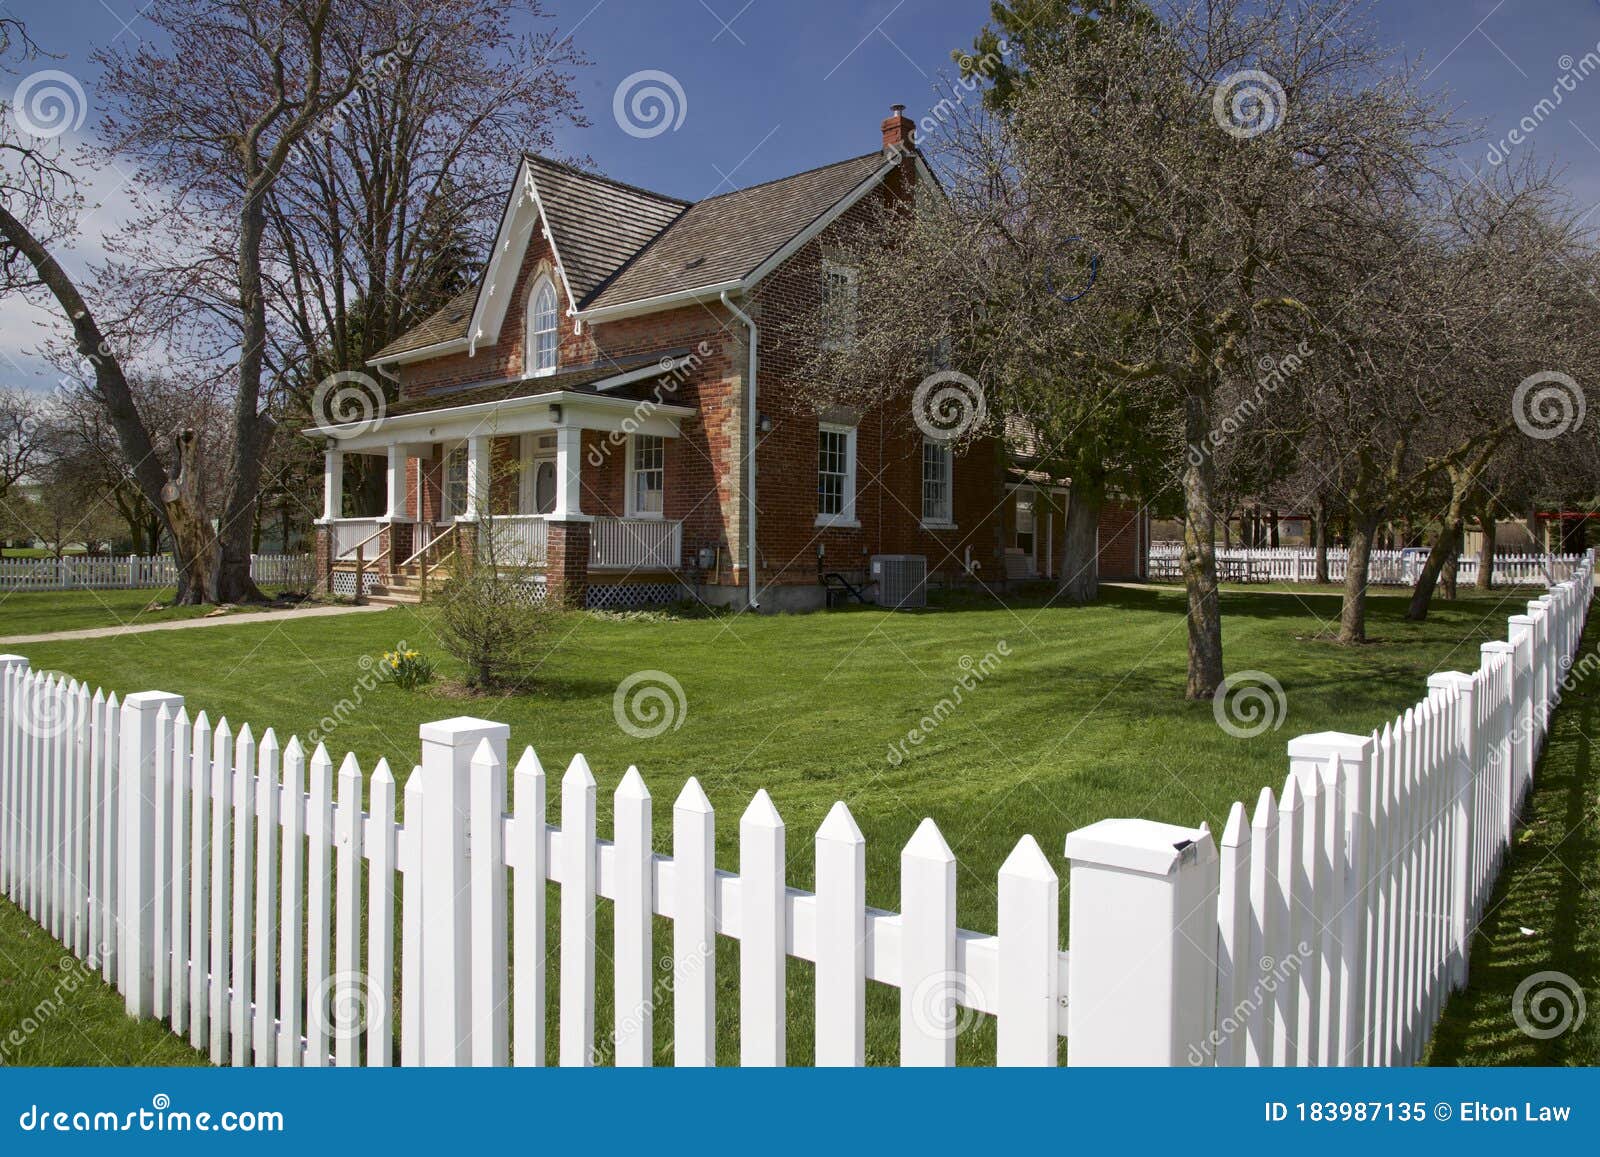 Springtime in the Front Lawn of the House with White Picket Fences Stock Image